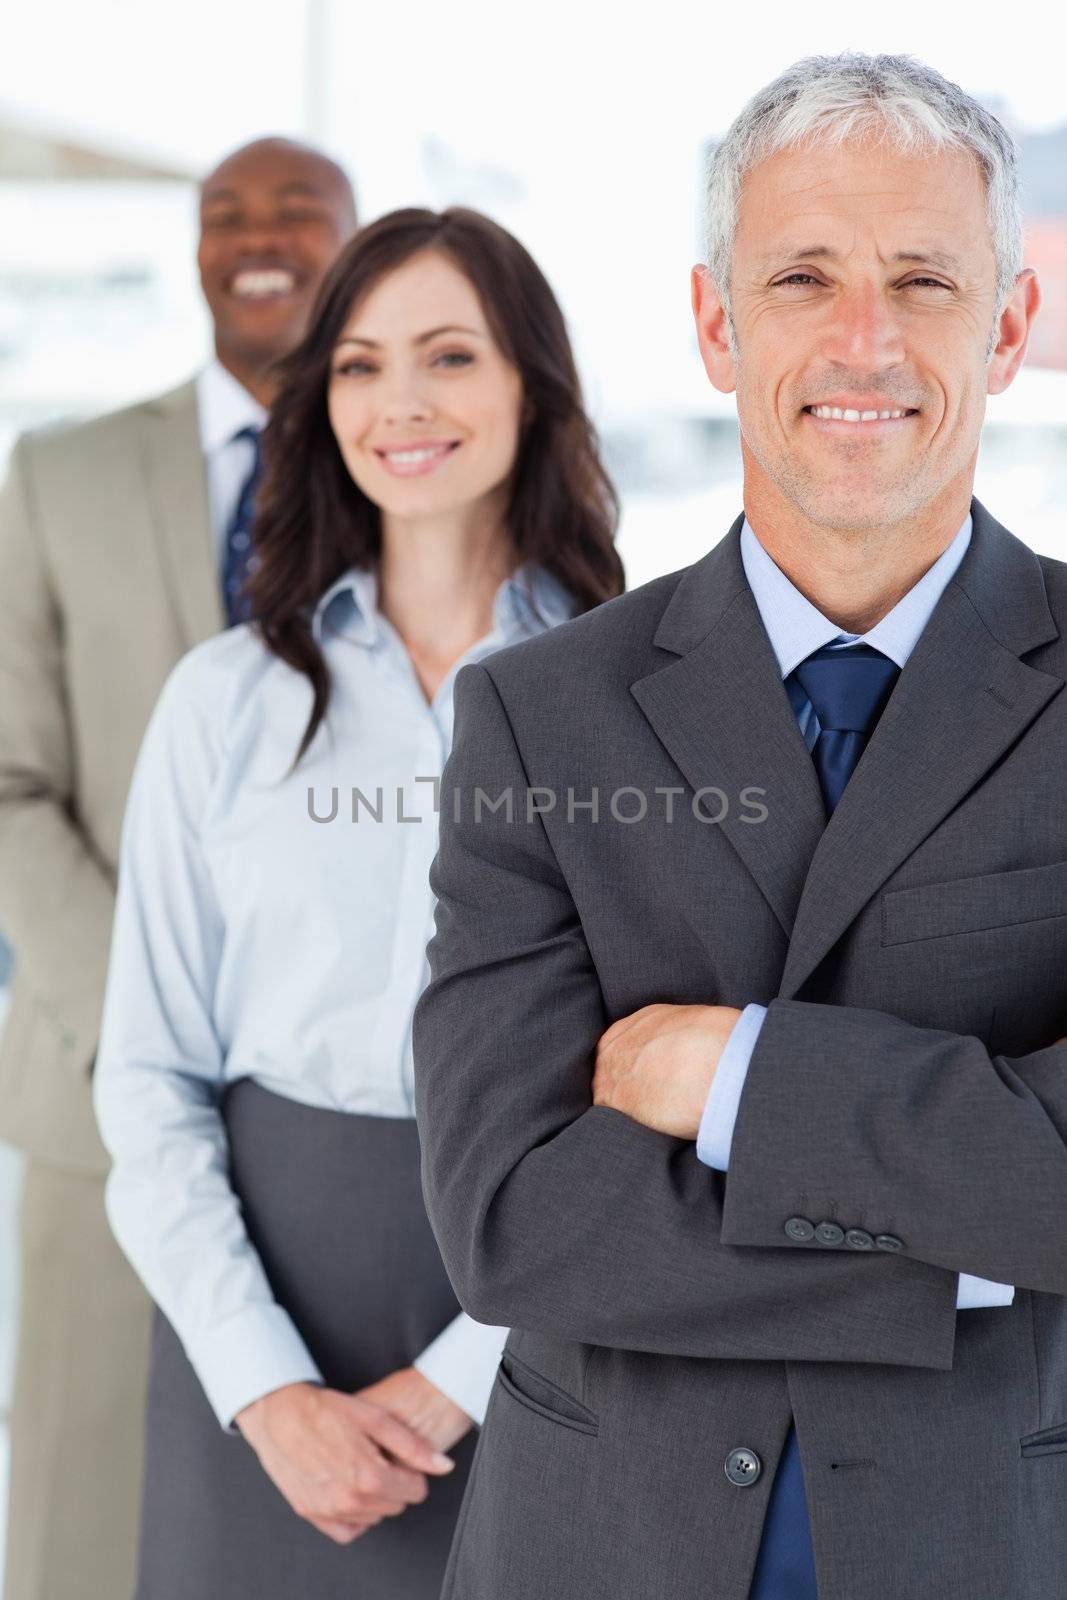 Mature smiling manager in a formal suit followed by two young business people